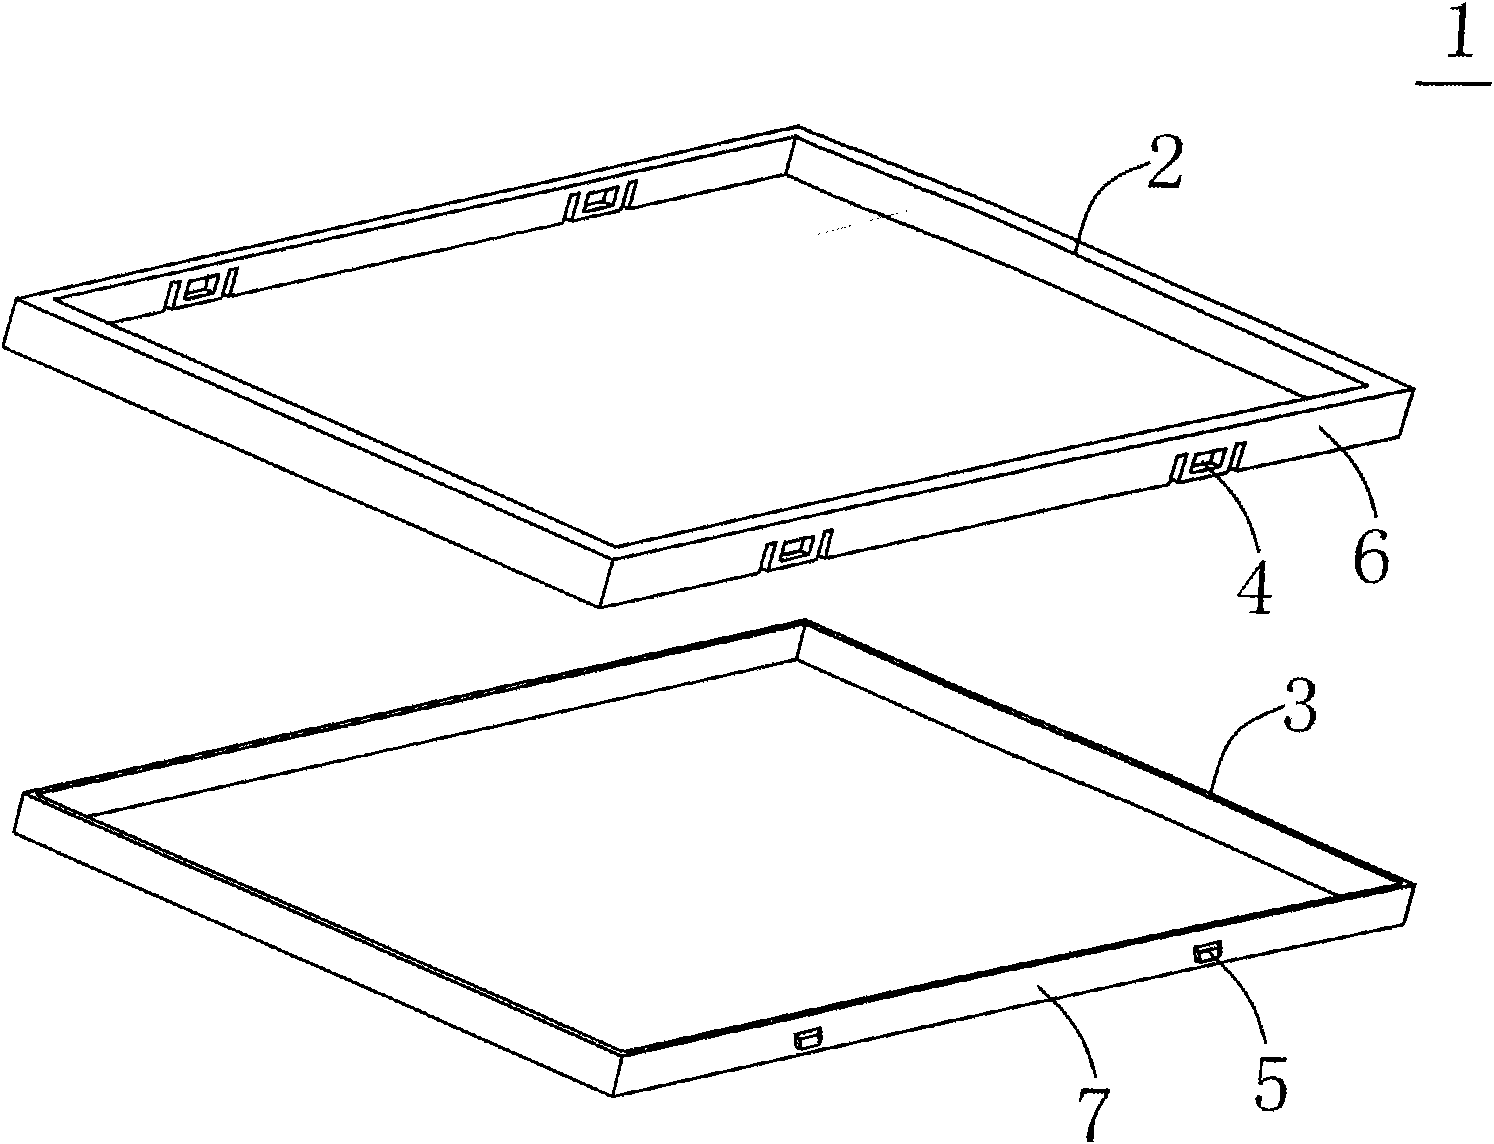 Display device and backlight module thereof